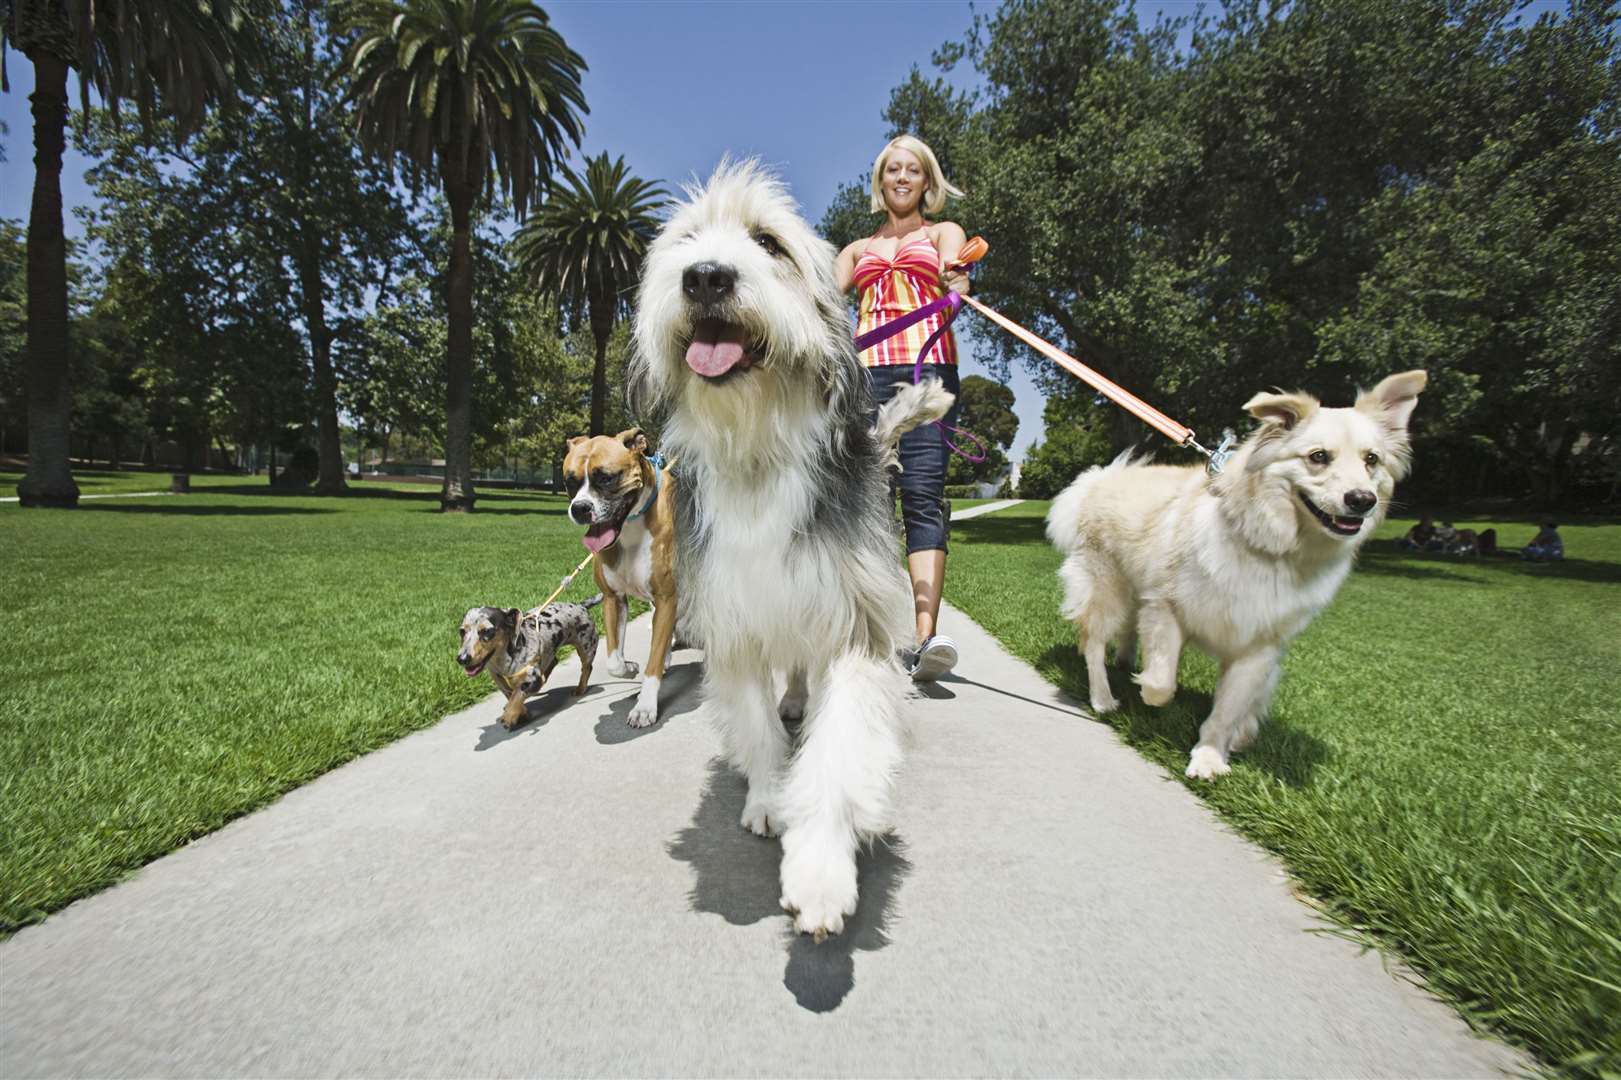 Take a Sunday stroll like no other with your dog